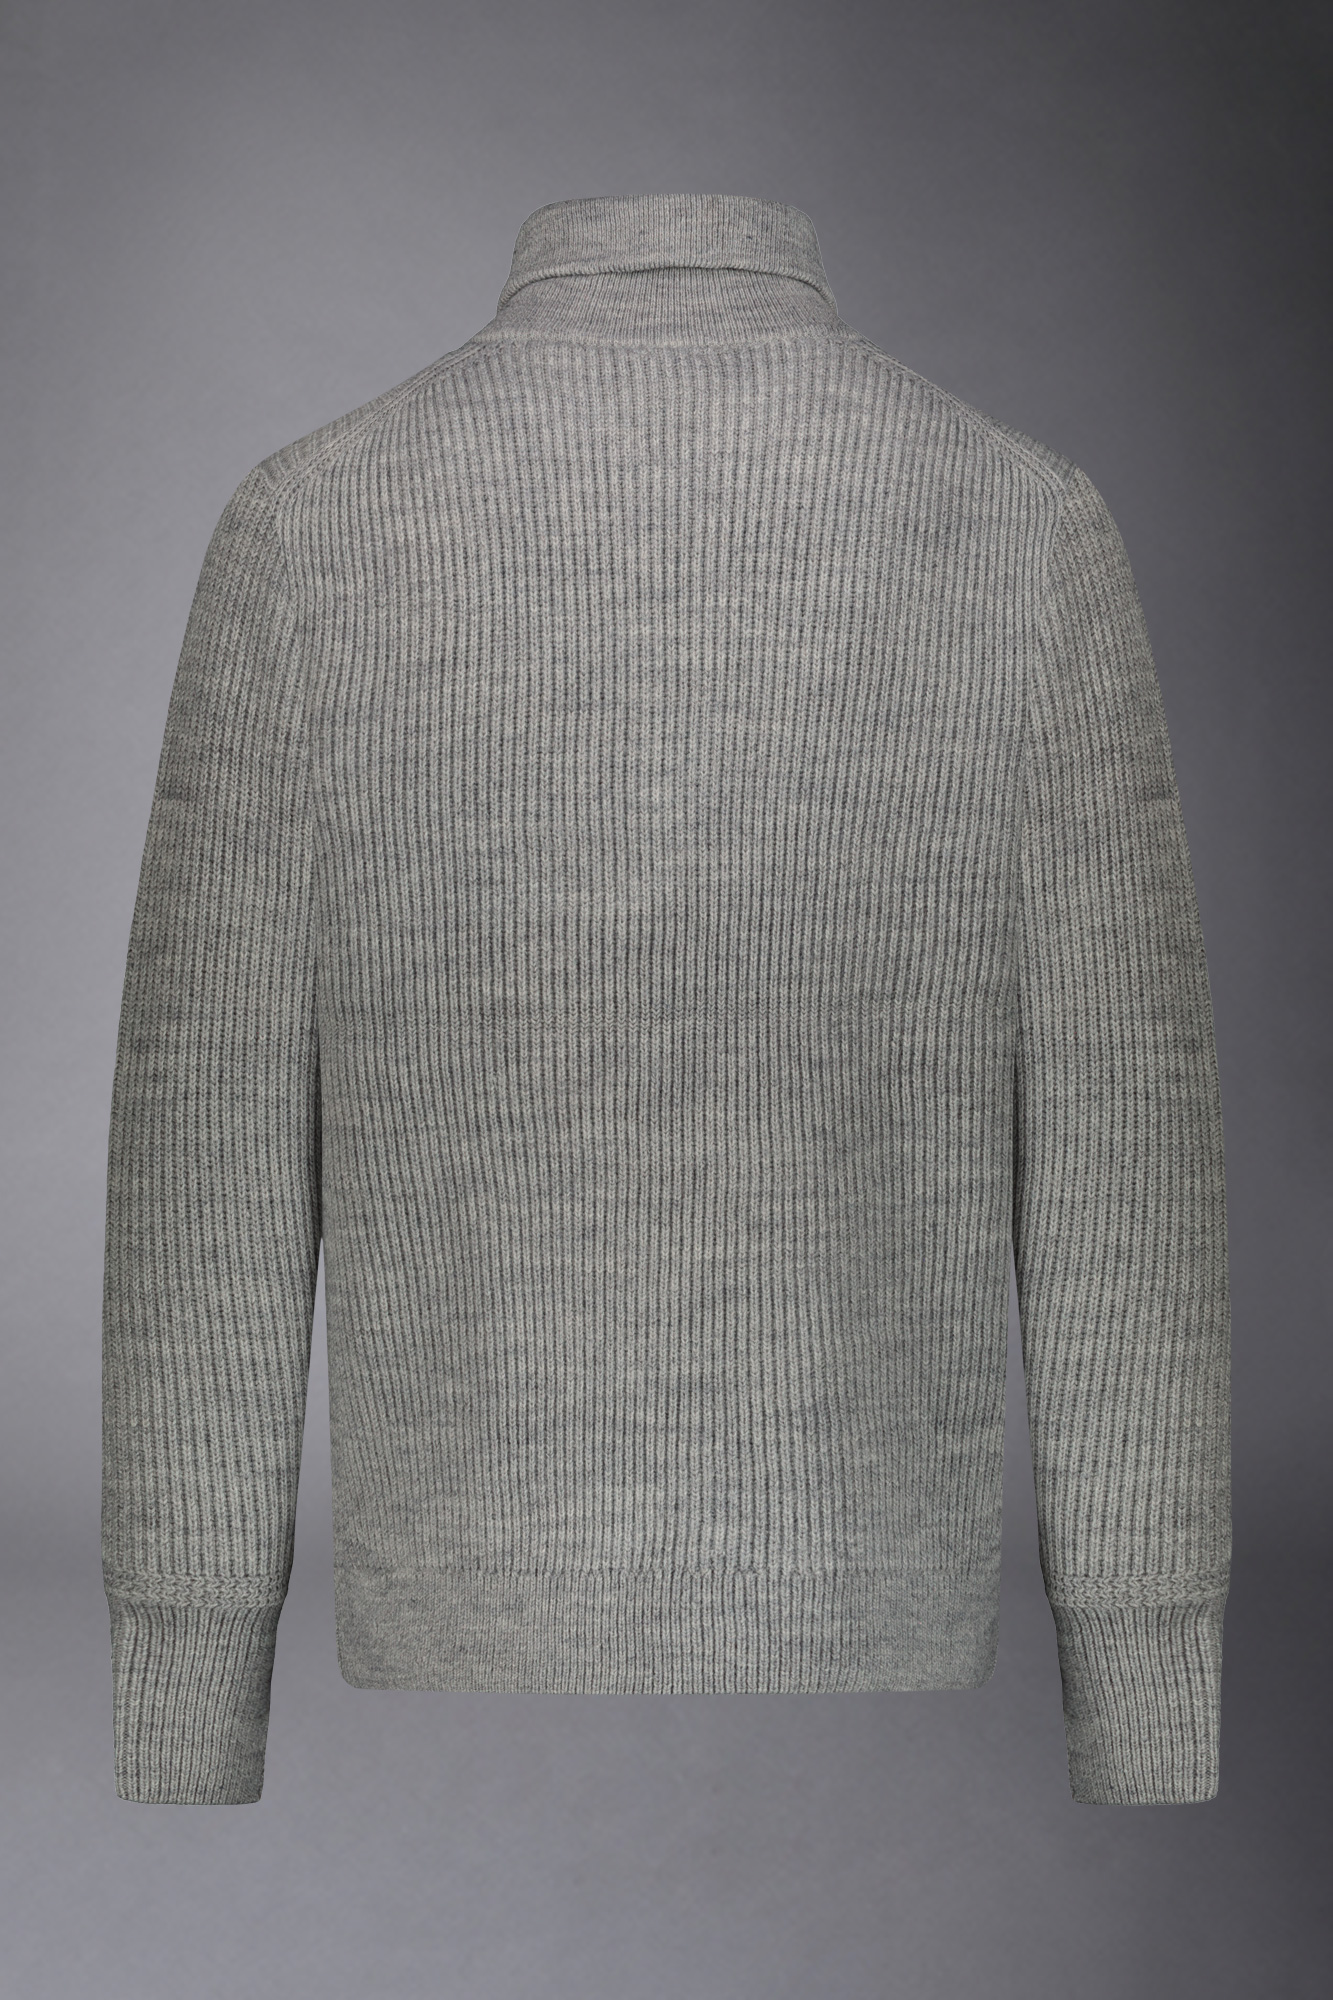 Men's wool-blend zip neck sweater with English rib knit regular fit image number null